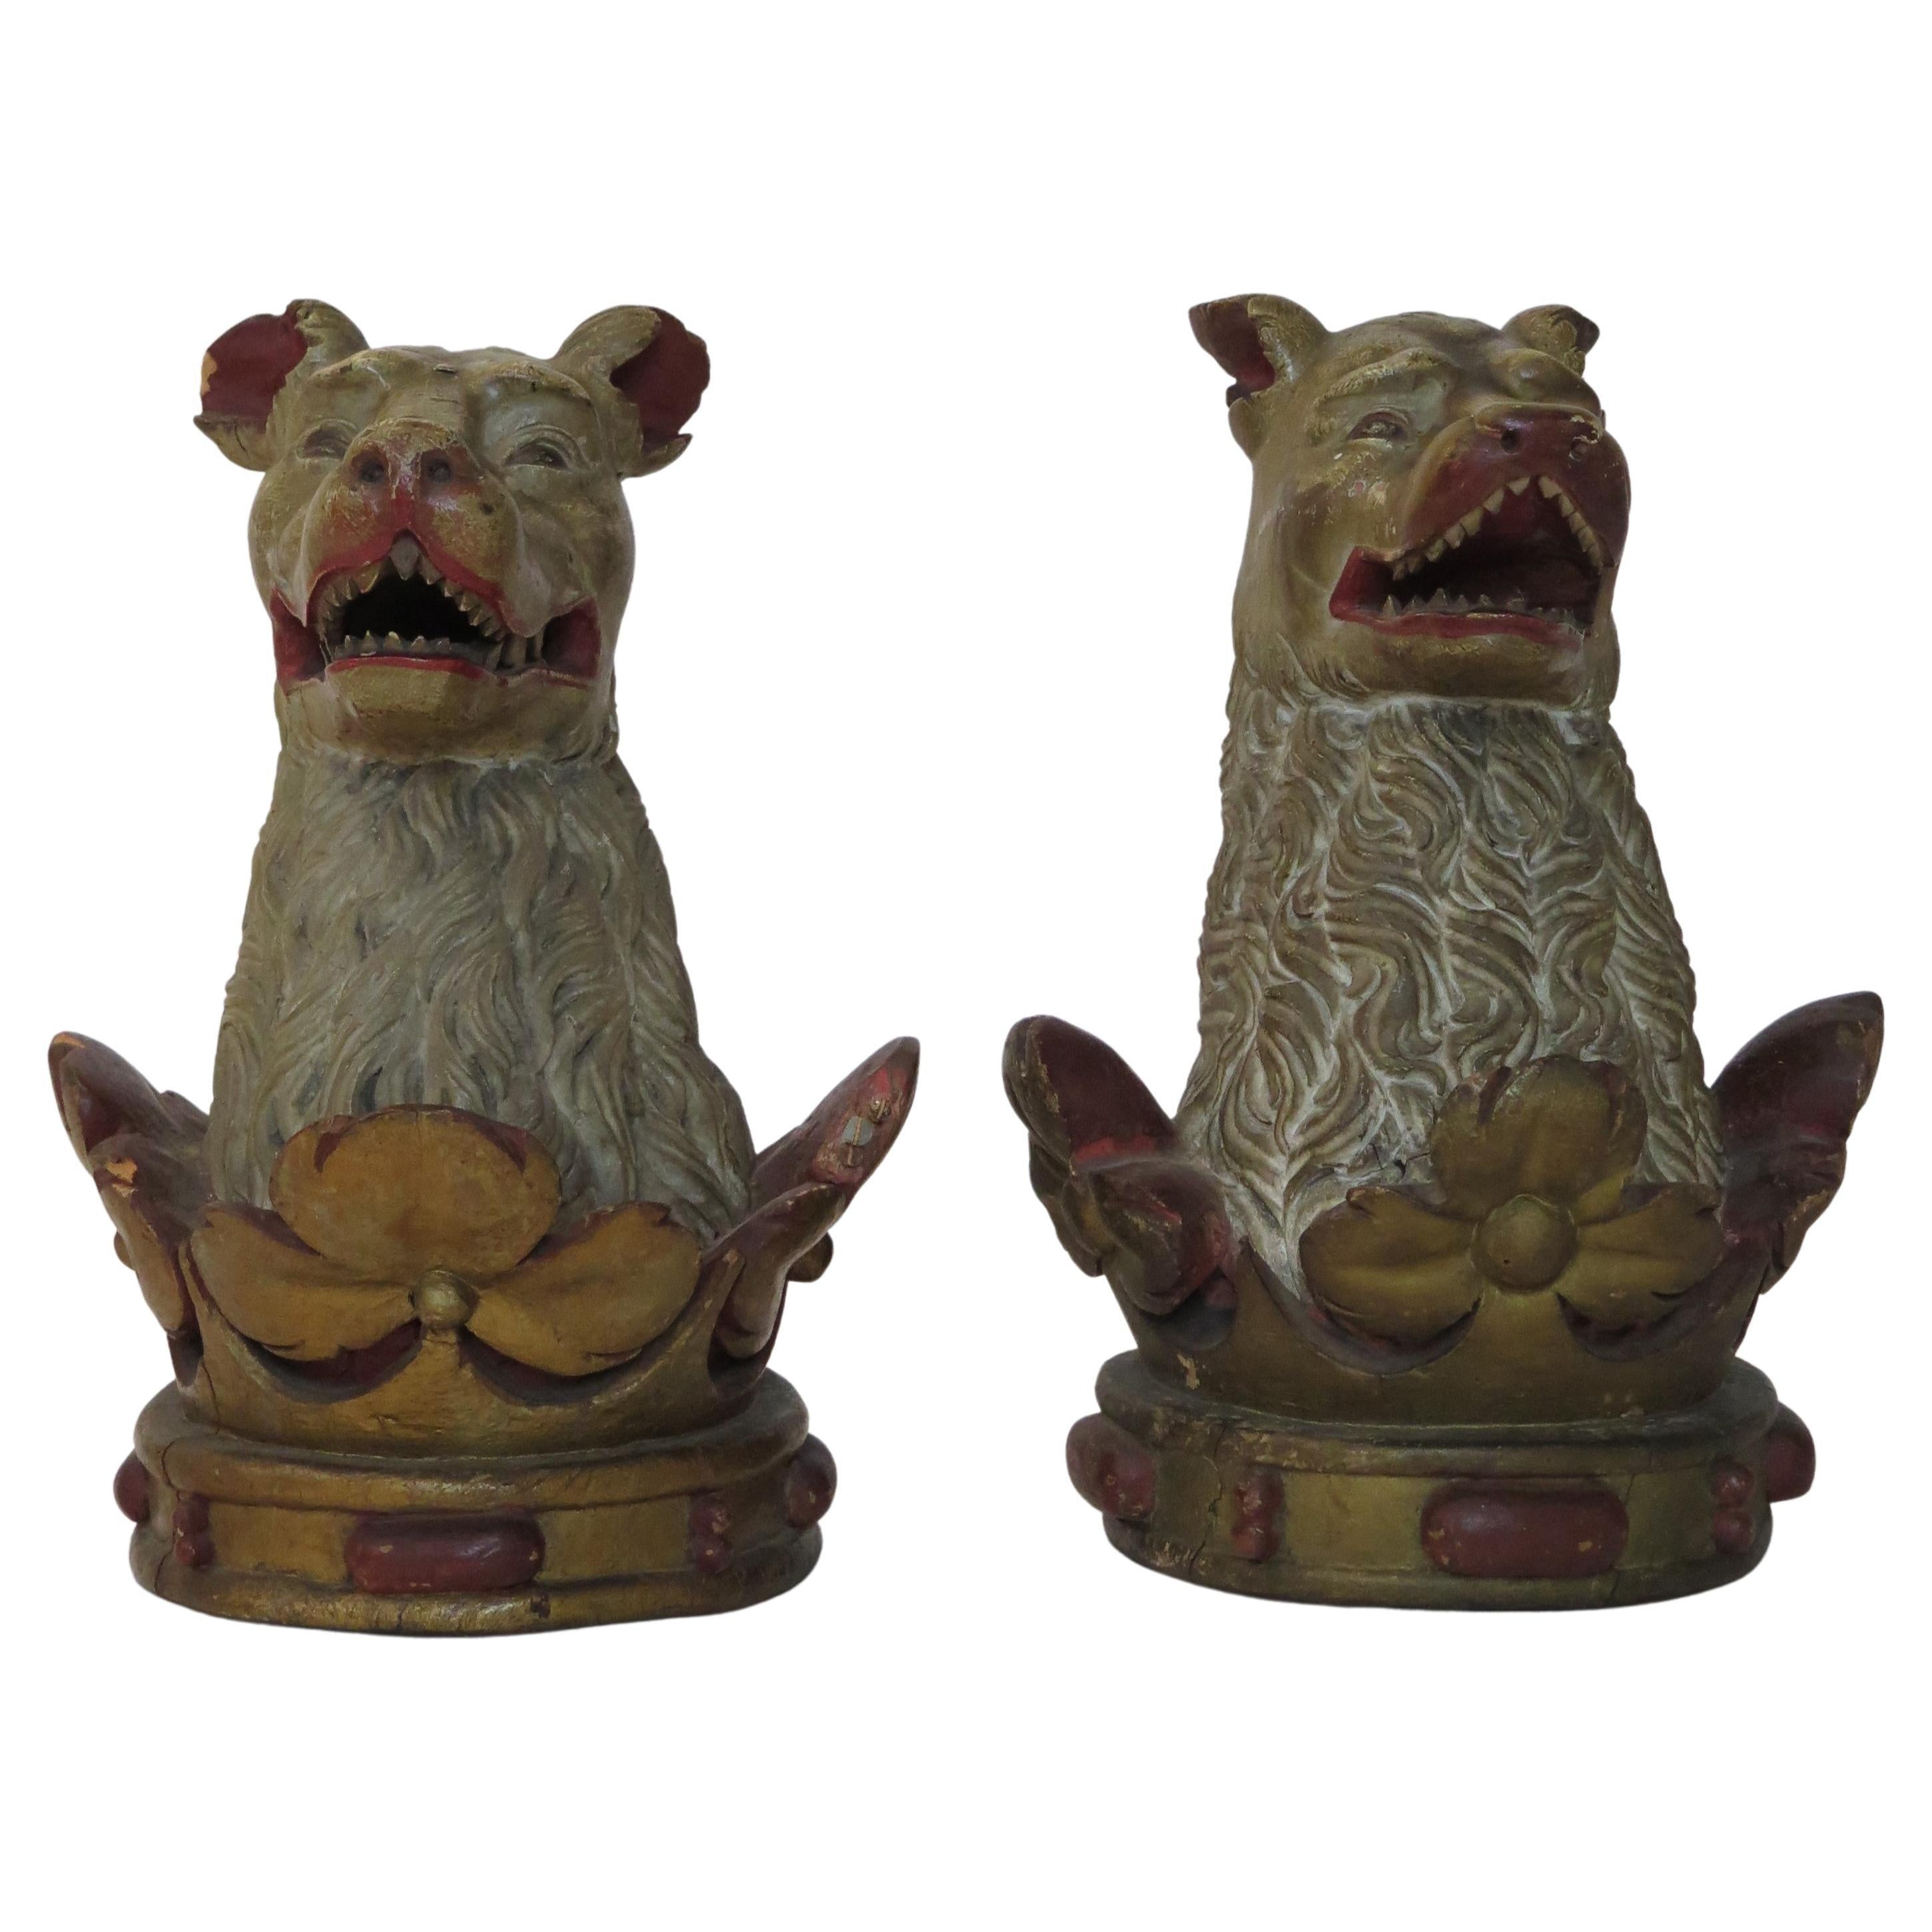 Carved Wood Family Crests ''Out of a Ducal Coronet, Or, a Bear's Head Ppr." For Sale